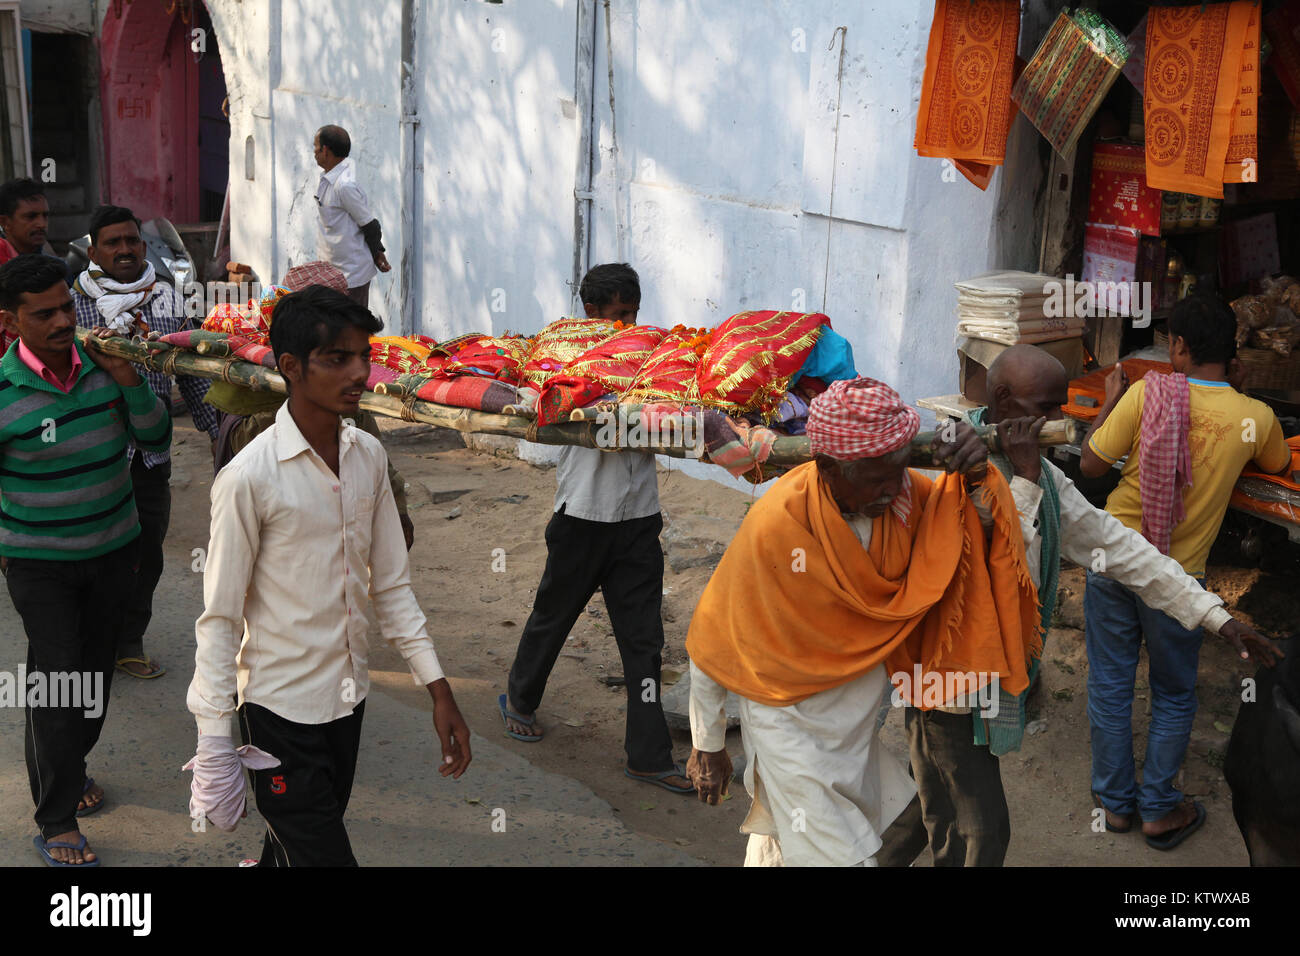 The shrouded body of a deceased man is carried on a stretcher through the streets of Gaya to the cremation site Stock Photo